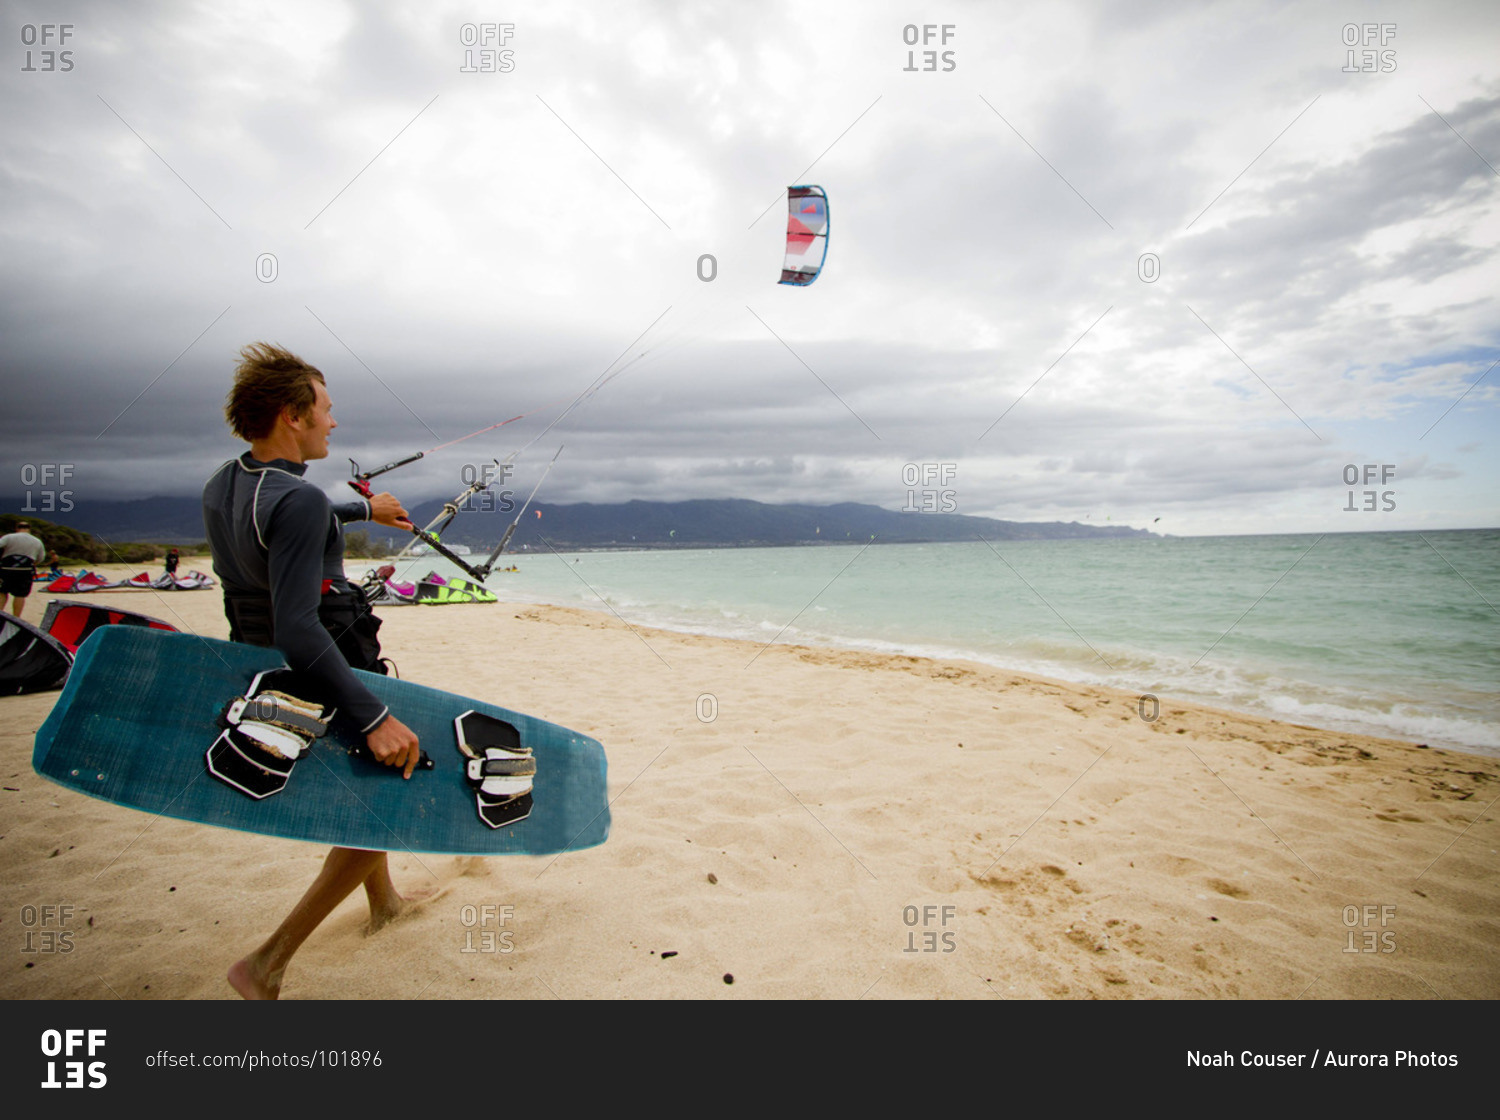 A kiteboarder prepares to hit the water on a beach on a cloudy summer day in Maui.